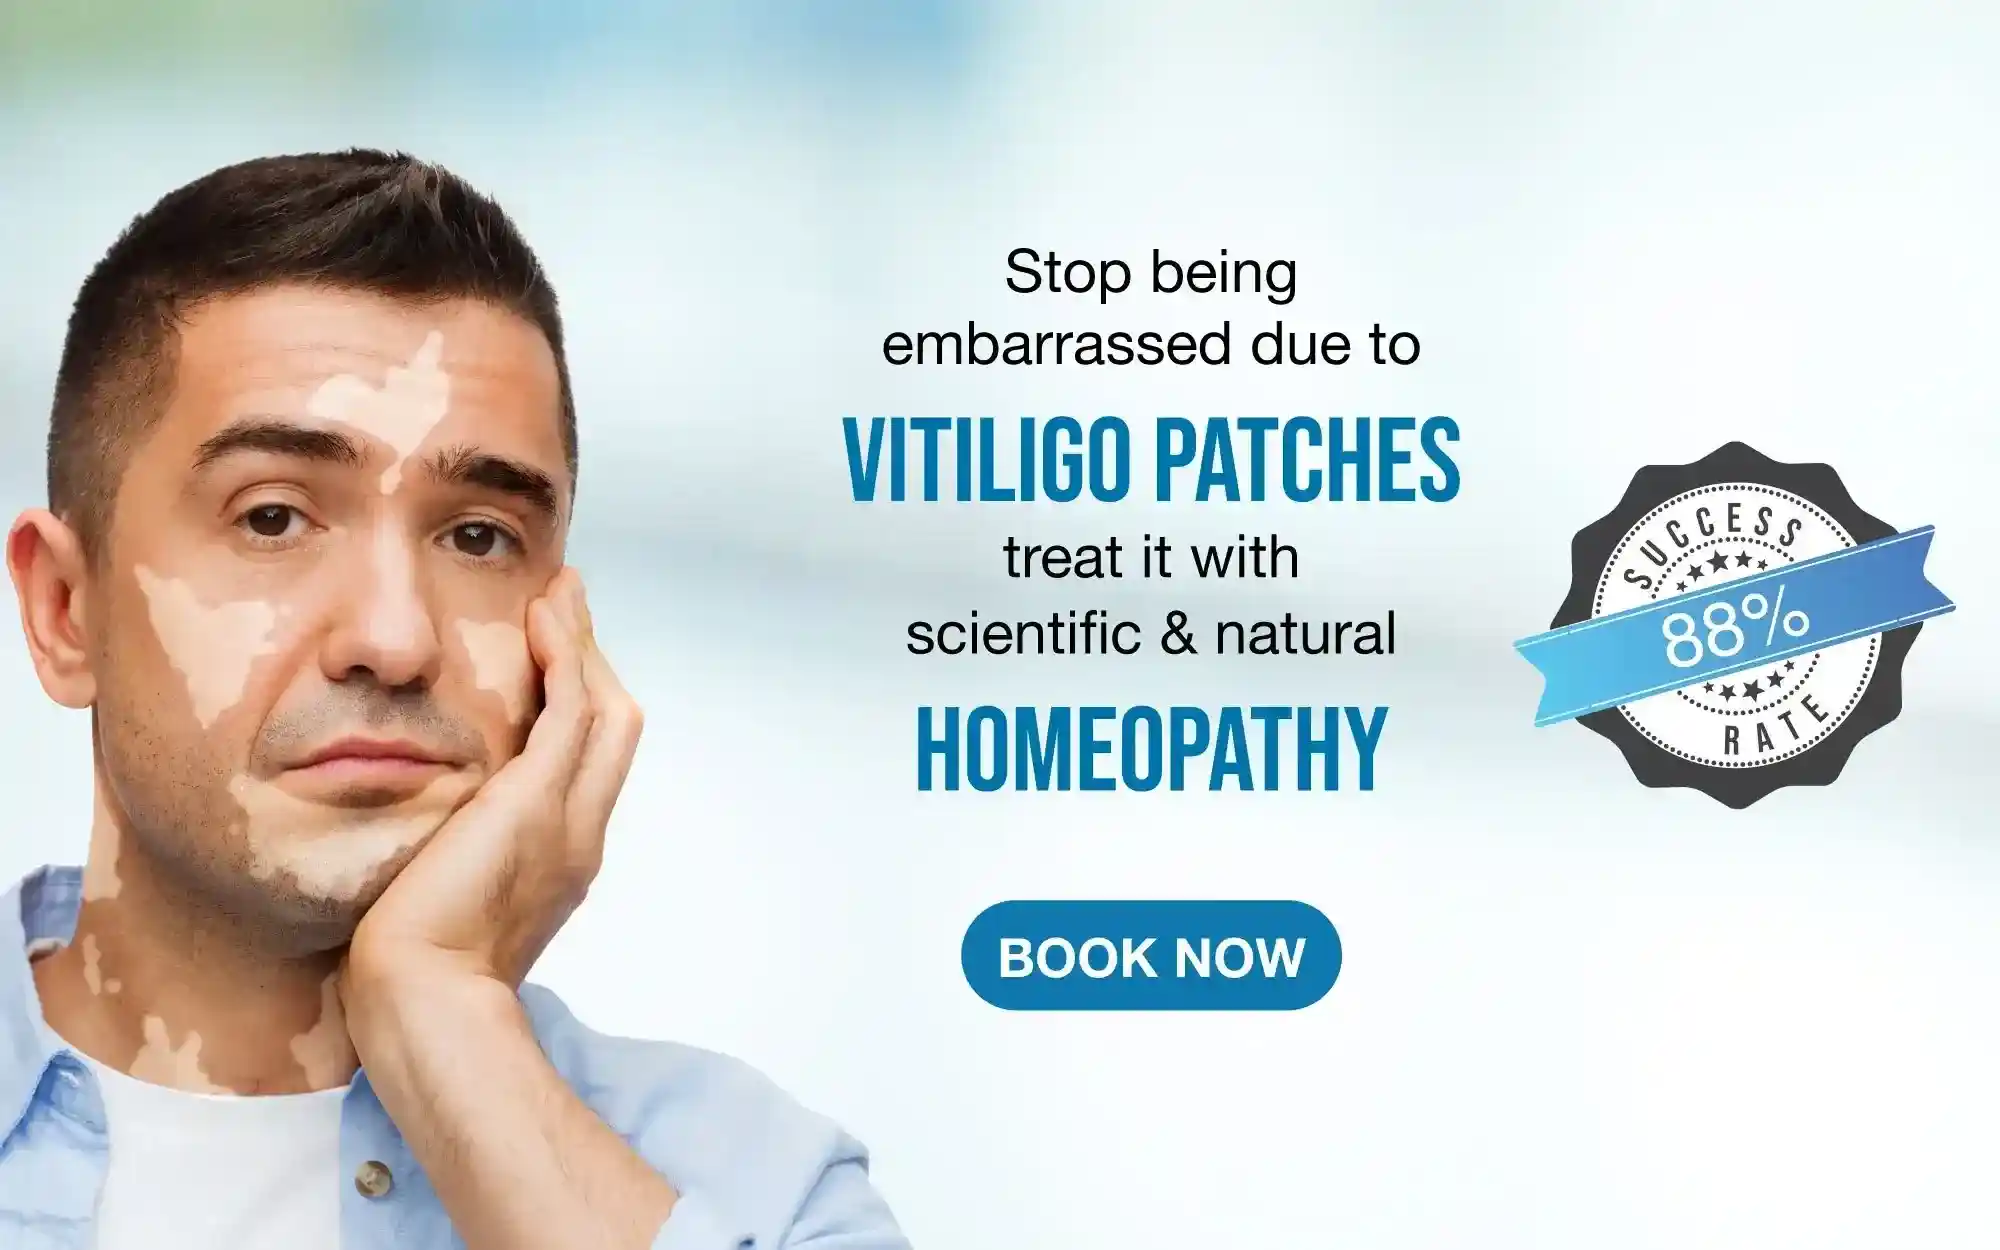 Visit our website: Dr Batra’s™ Homeopathy